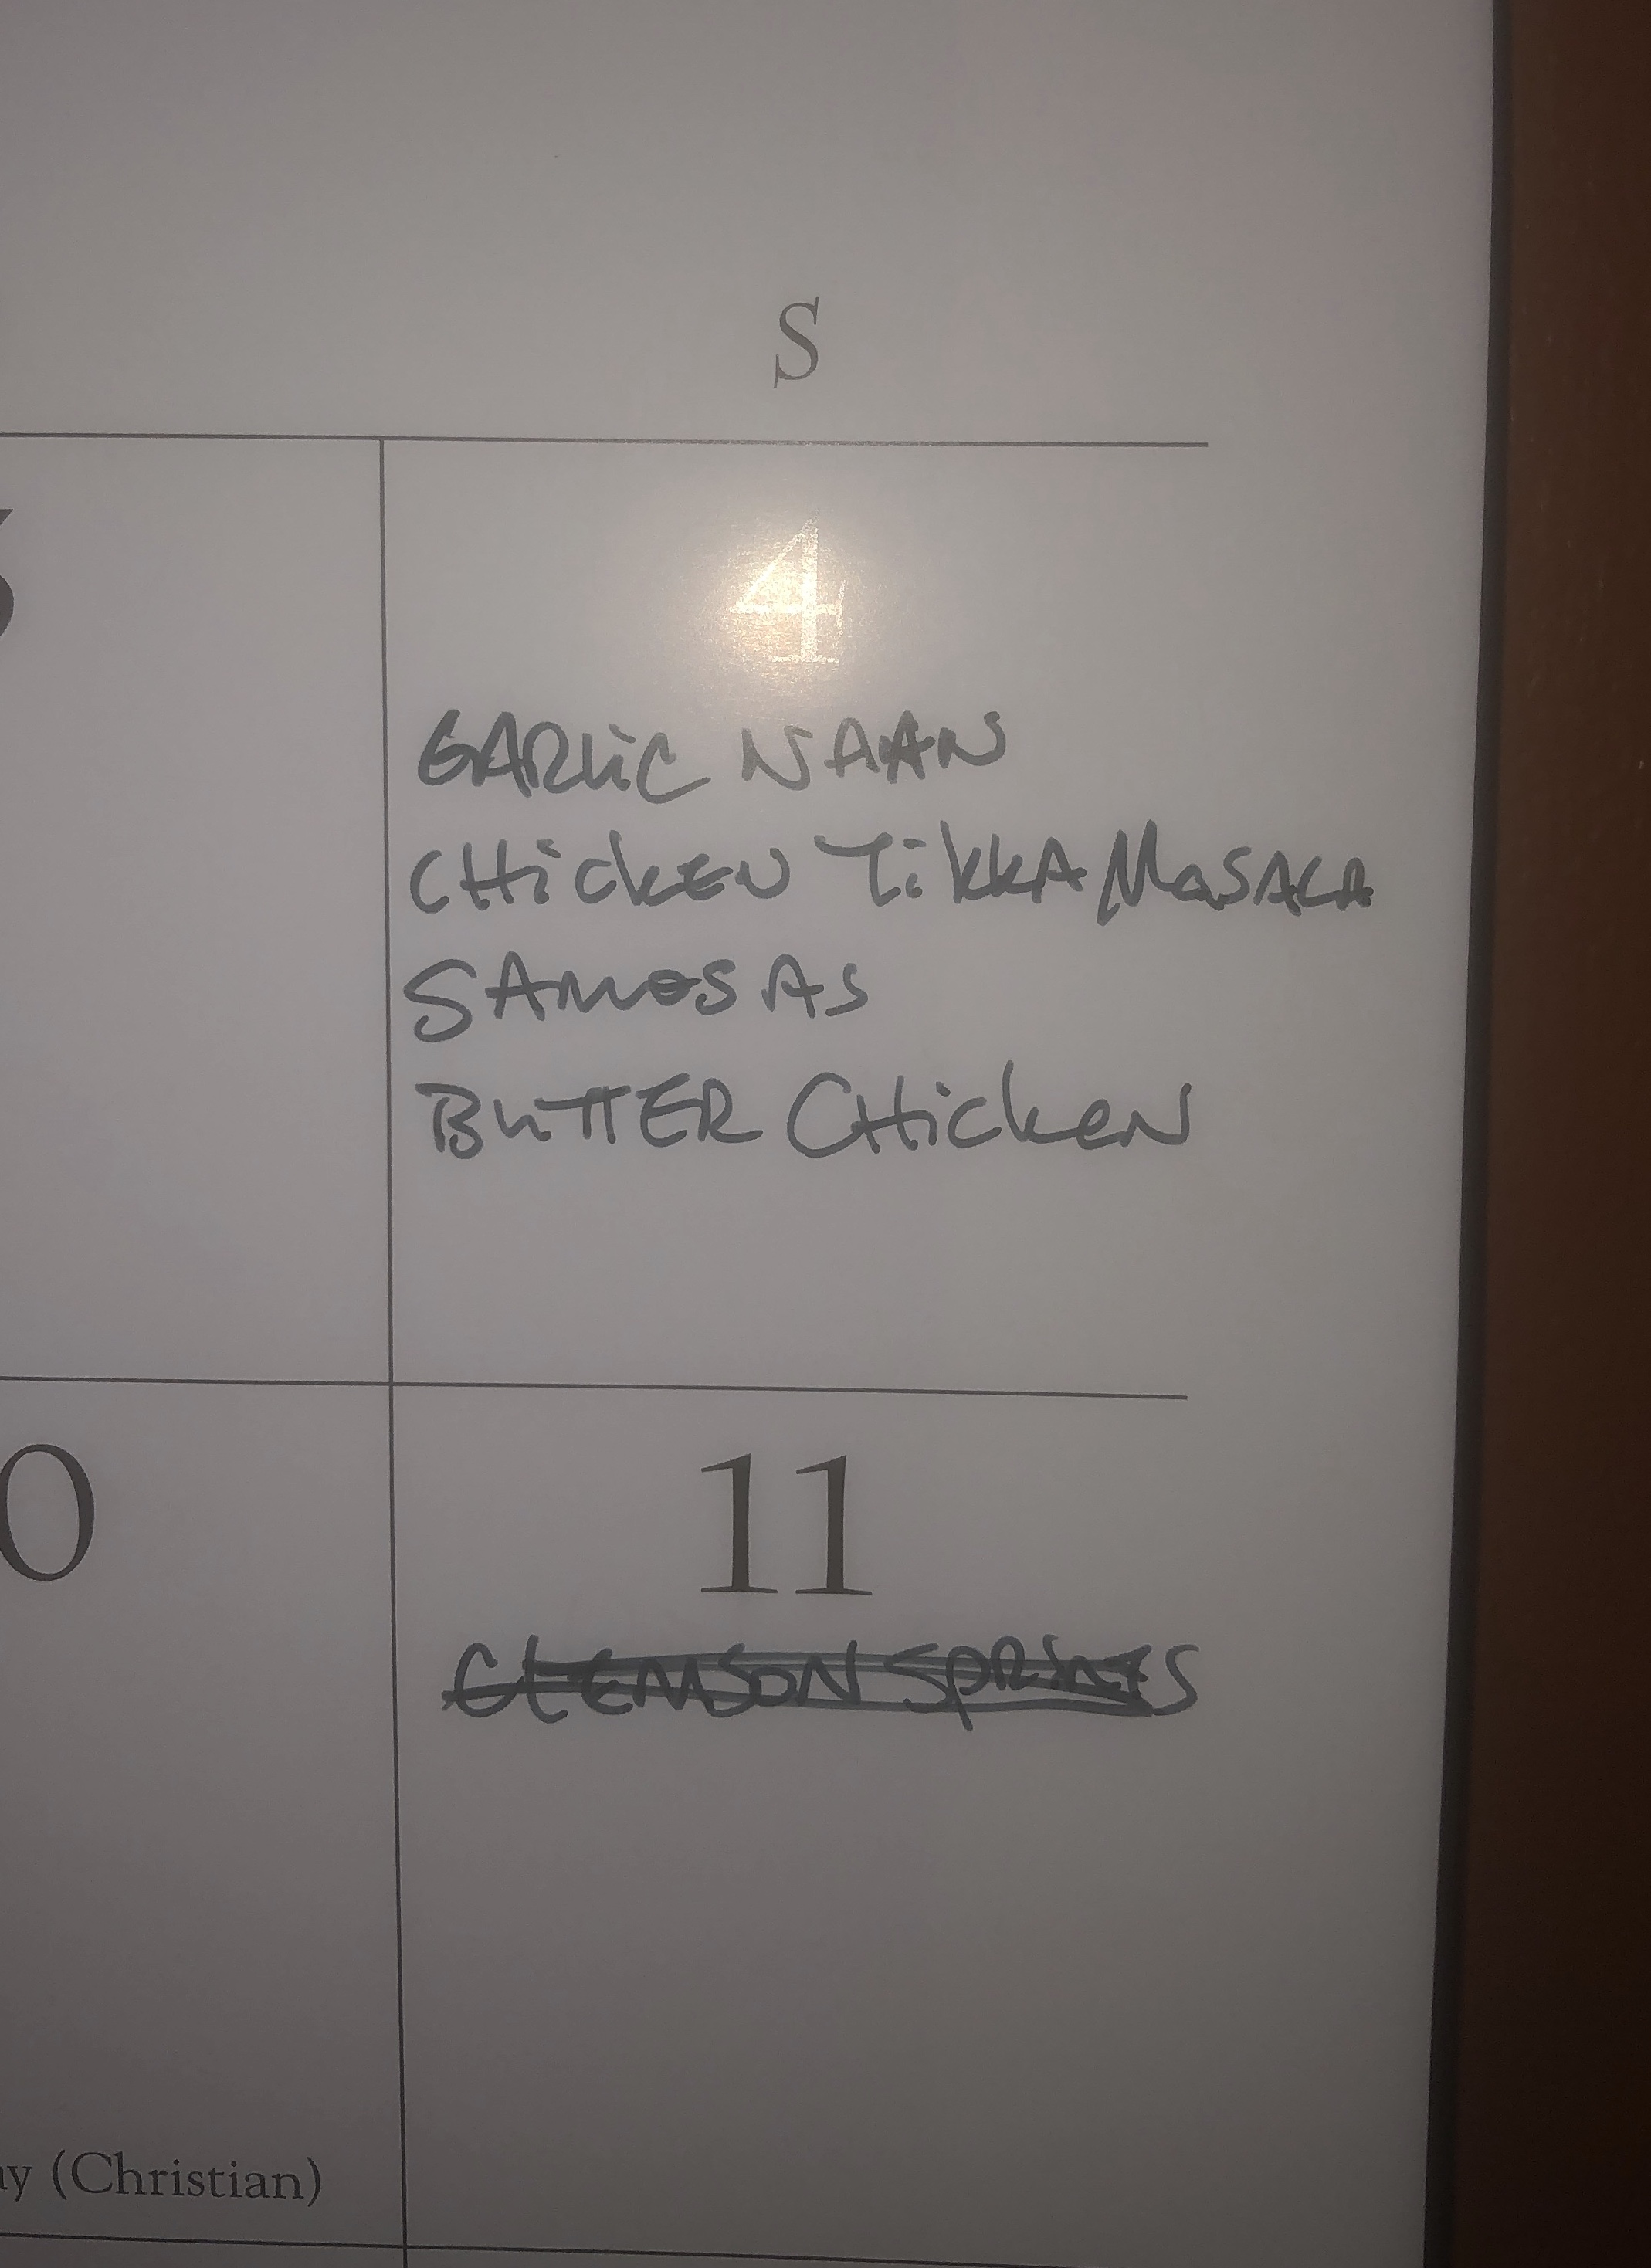 Calendar with Recipes listed